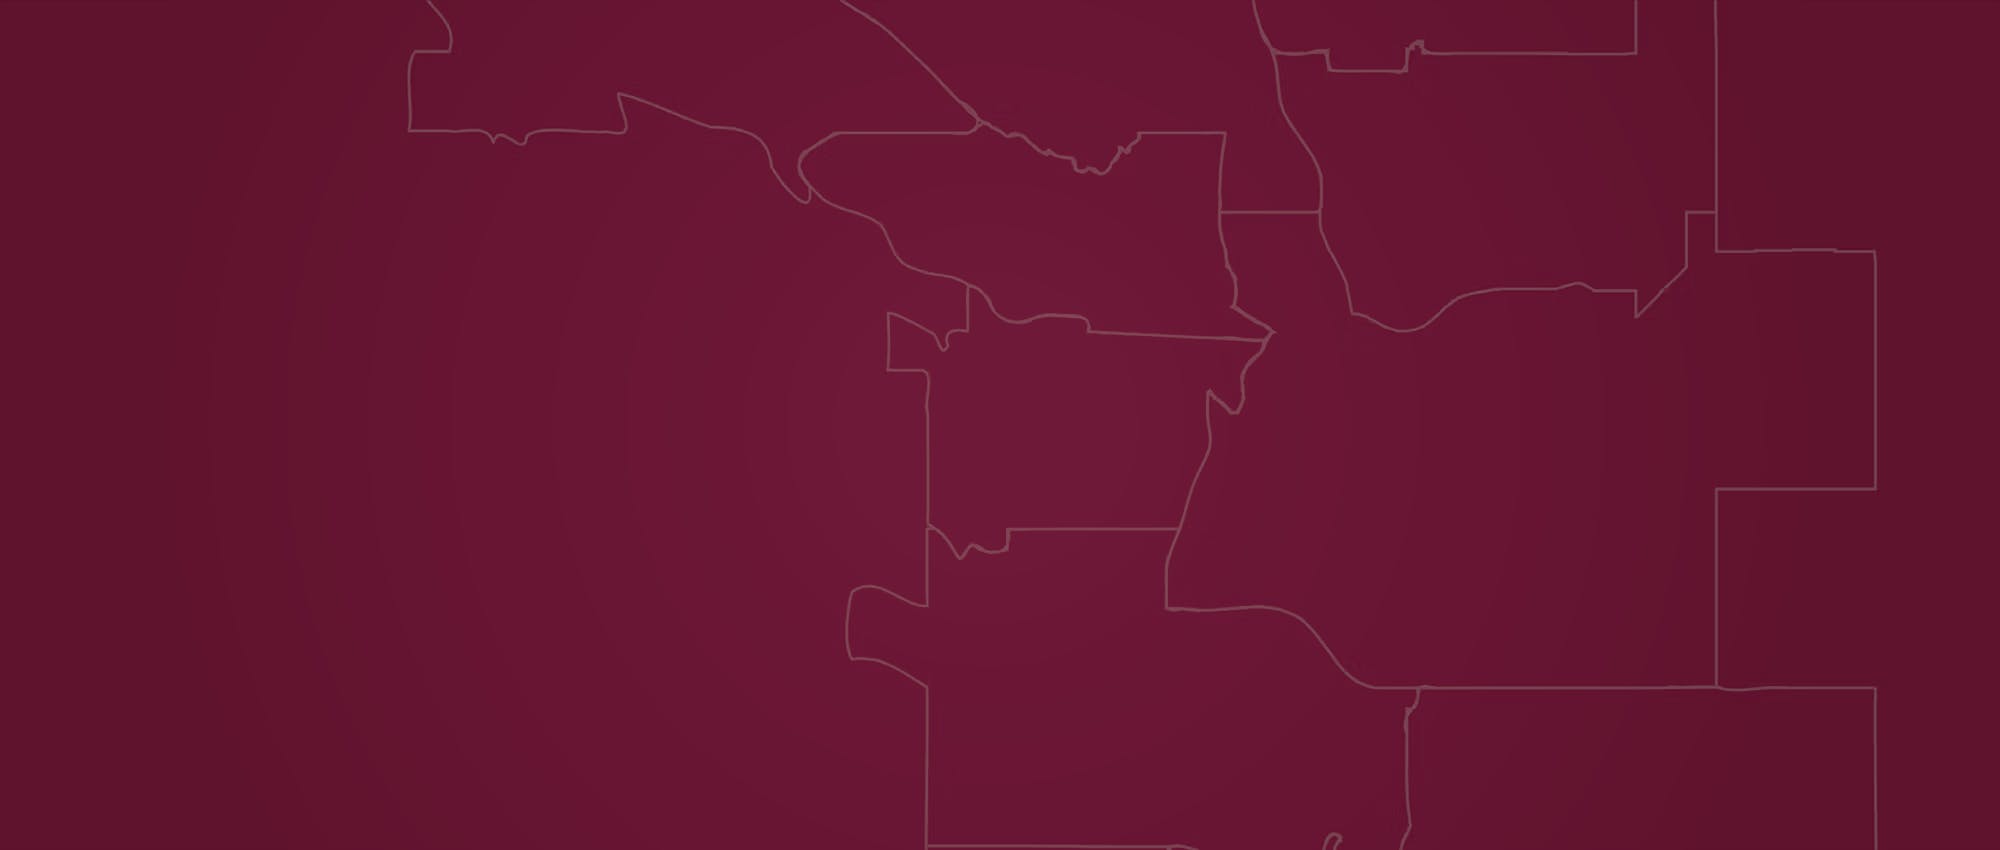 light grey outline of Calgary ward map on a burgundy background